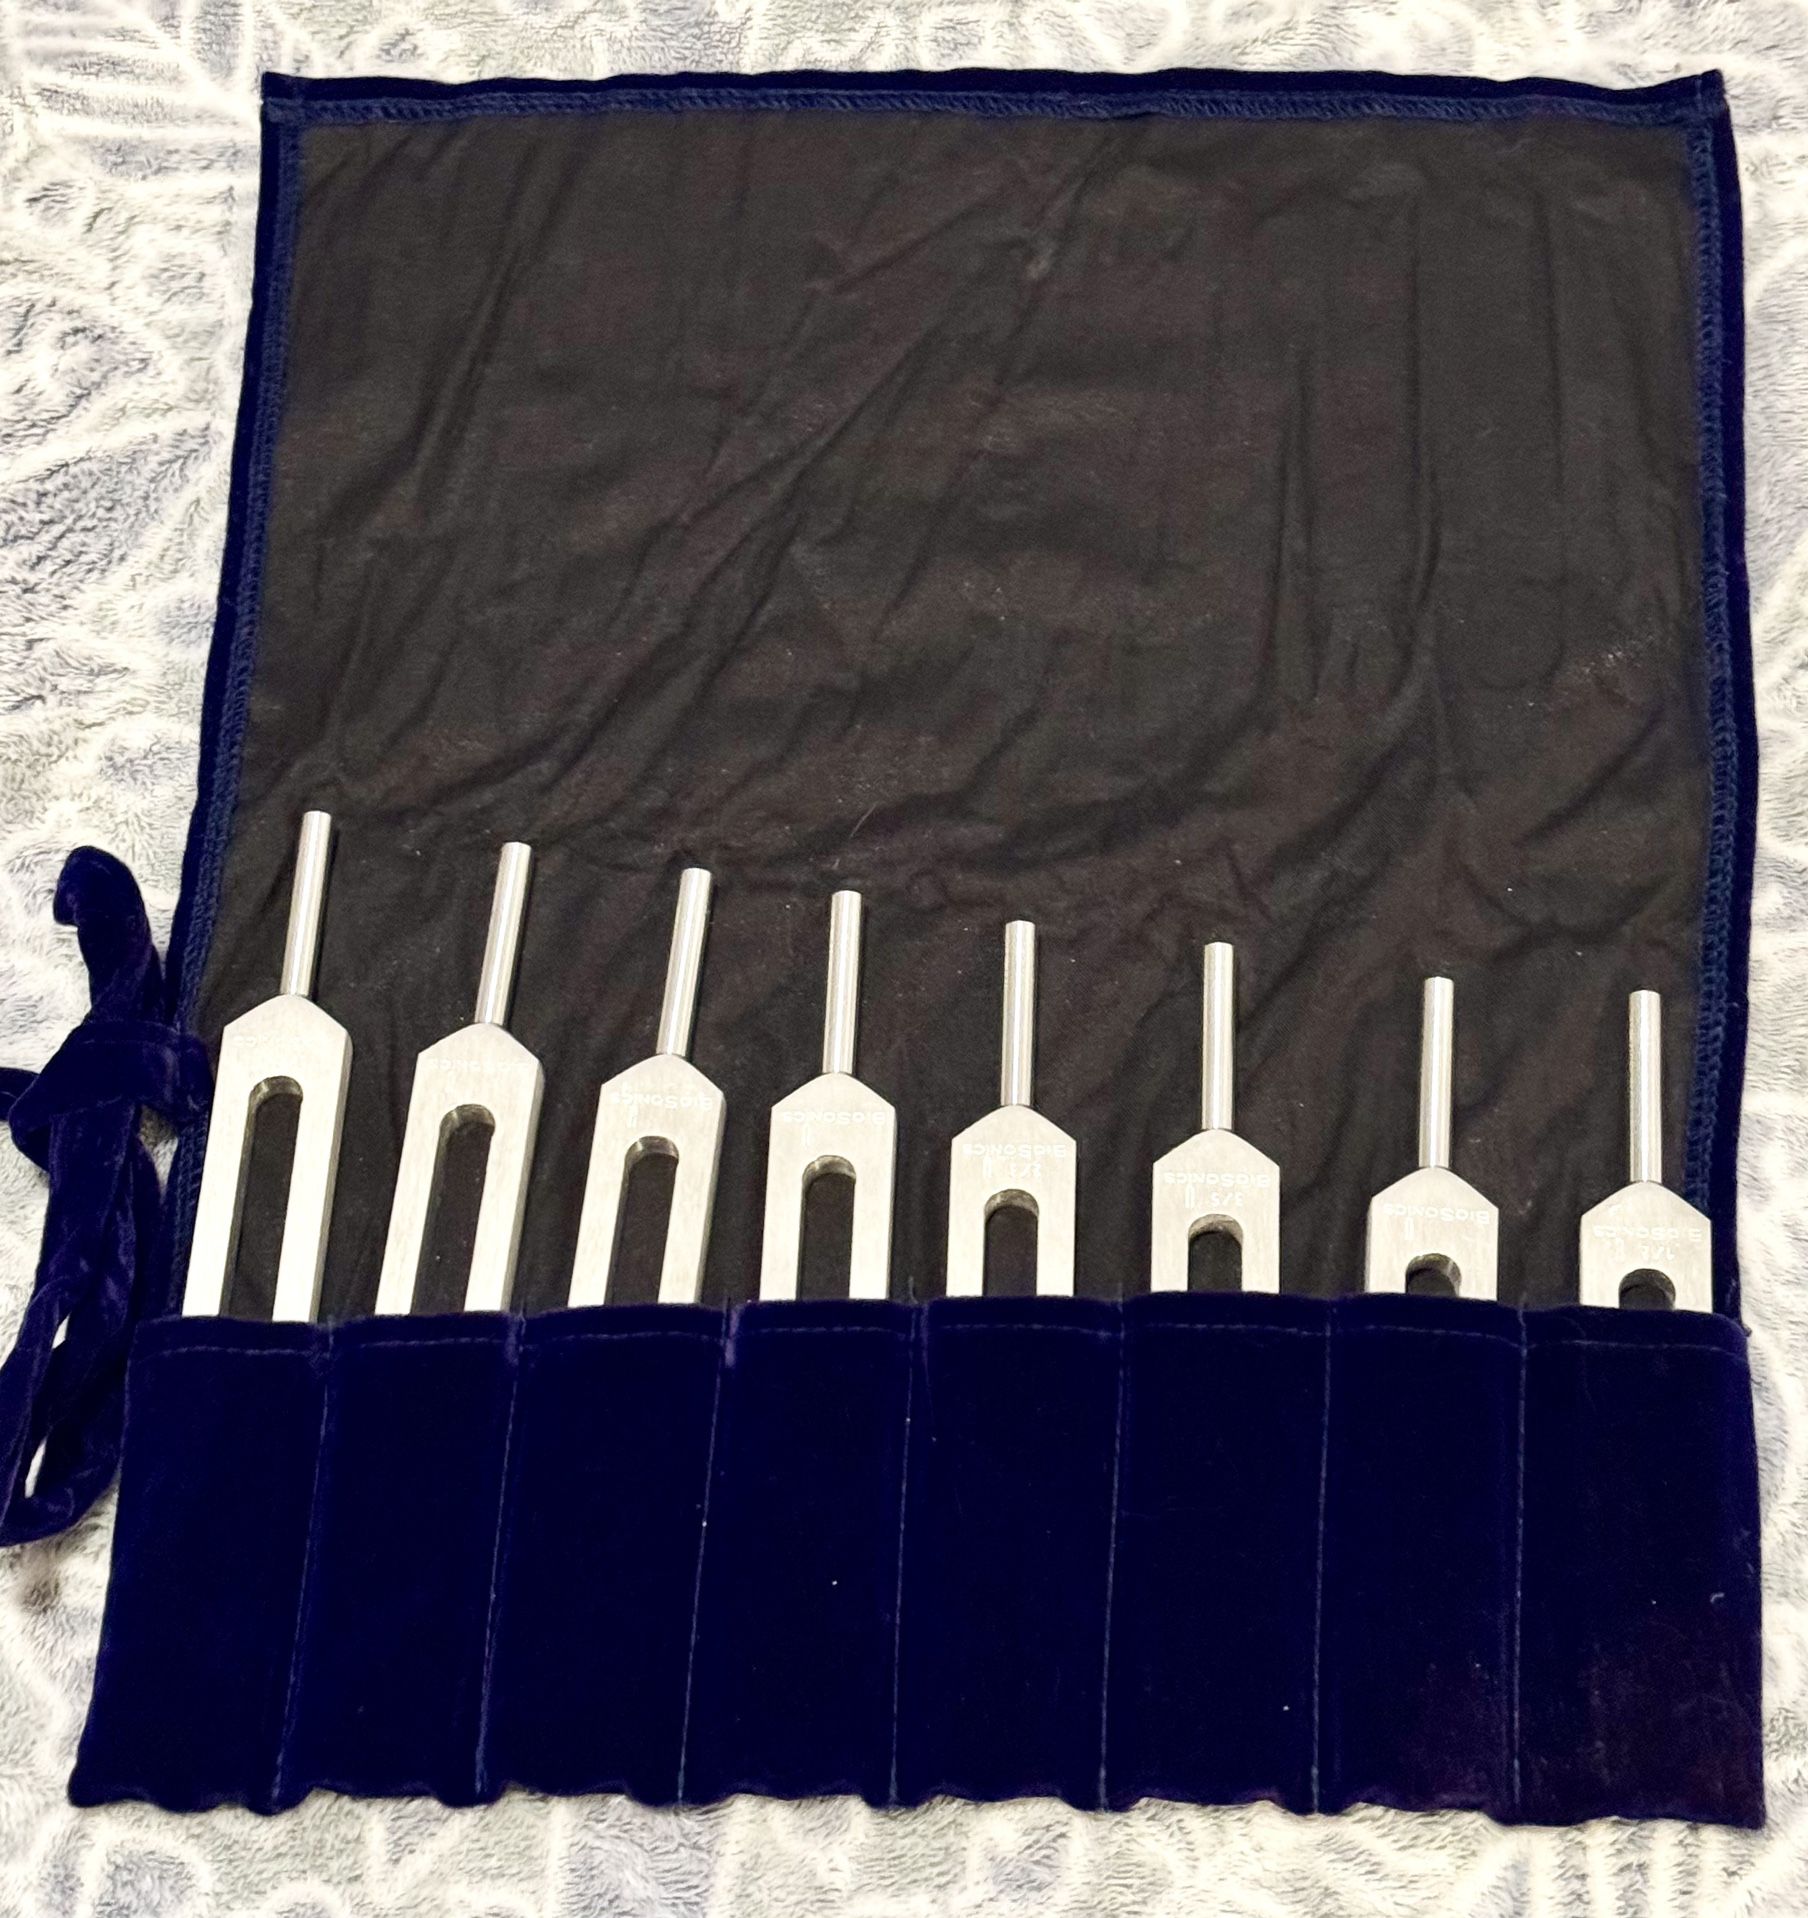 Bio Sonics Set Of 8 Chakra Healing Tuning Forks With Striker Included